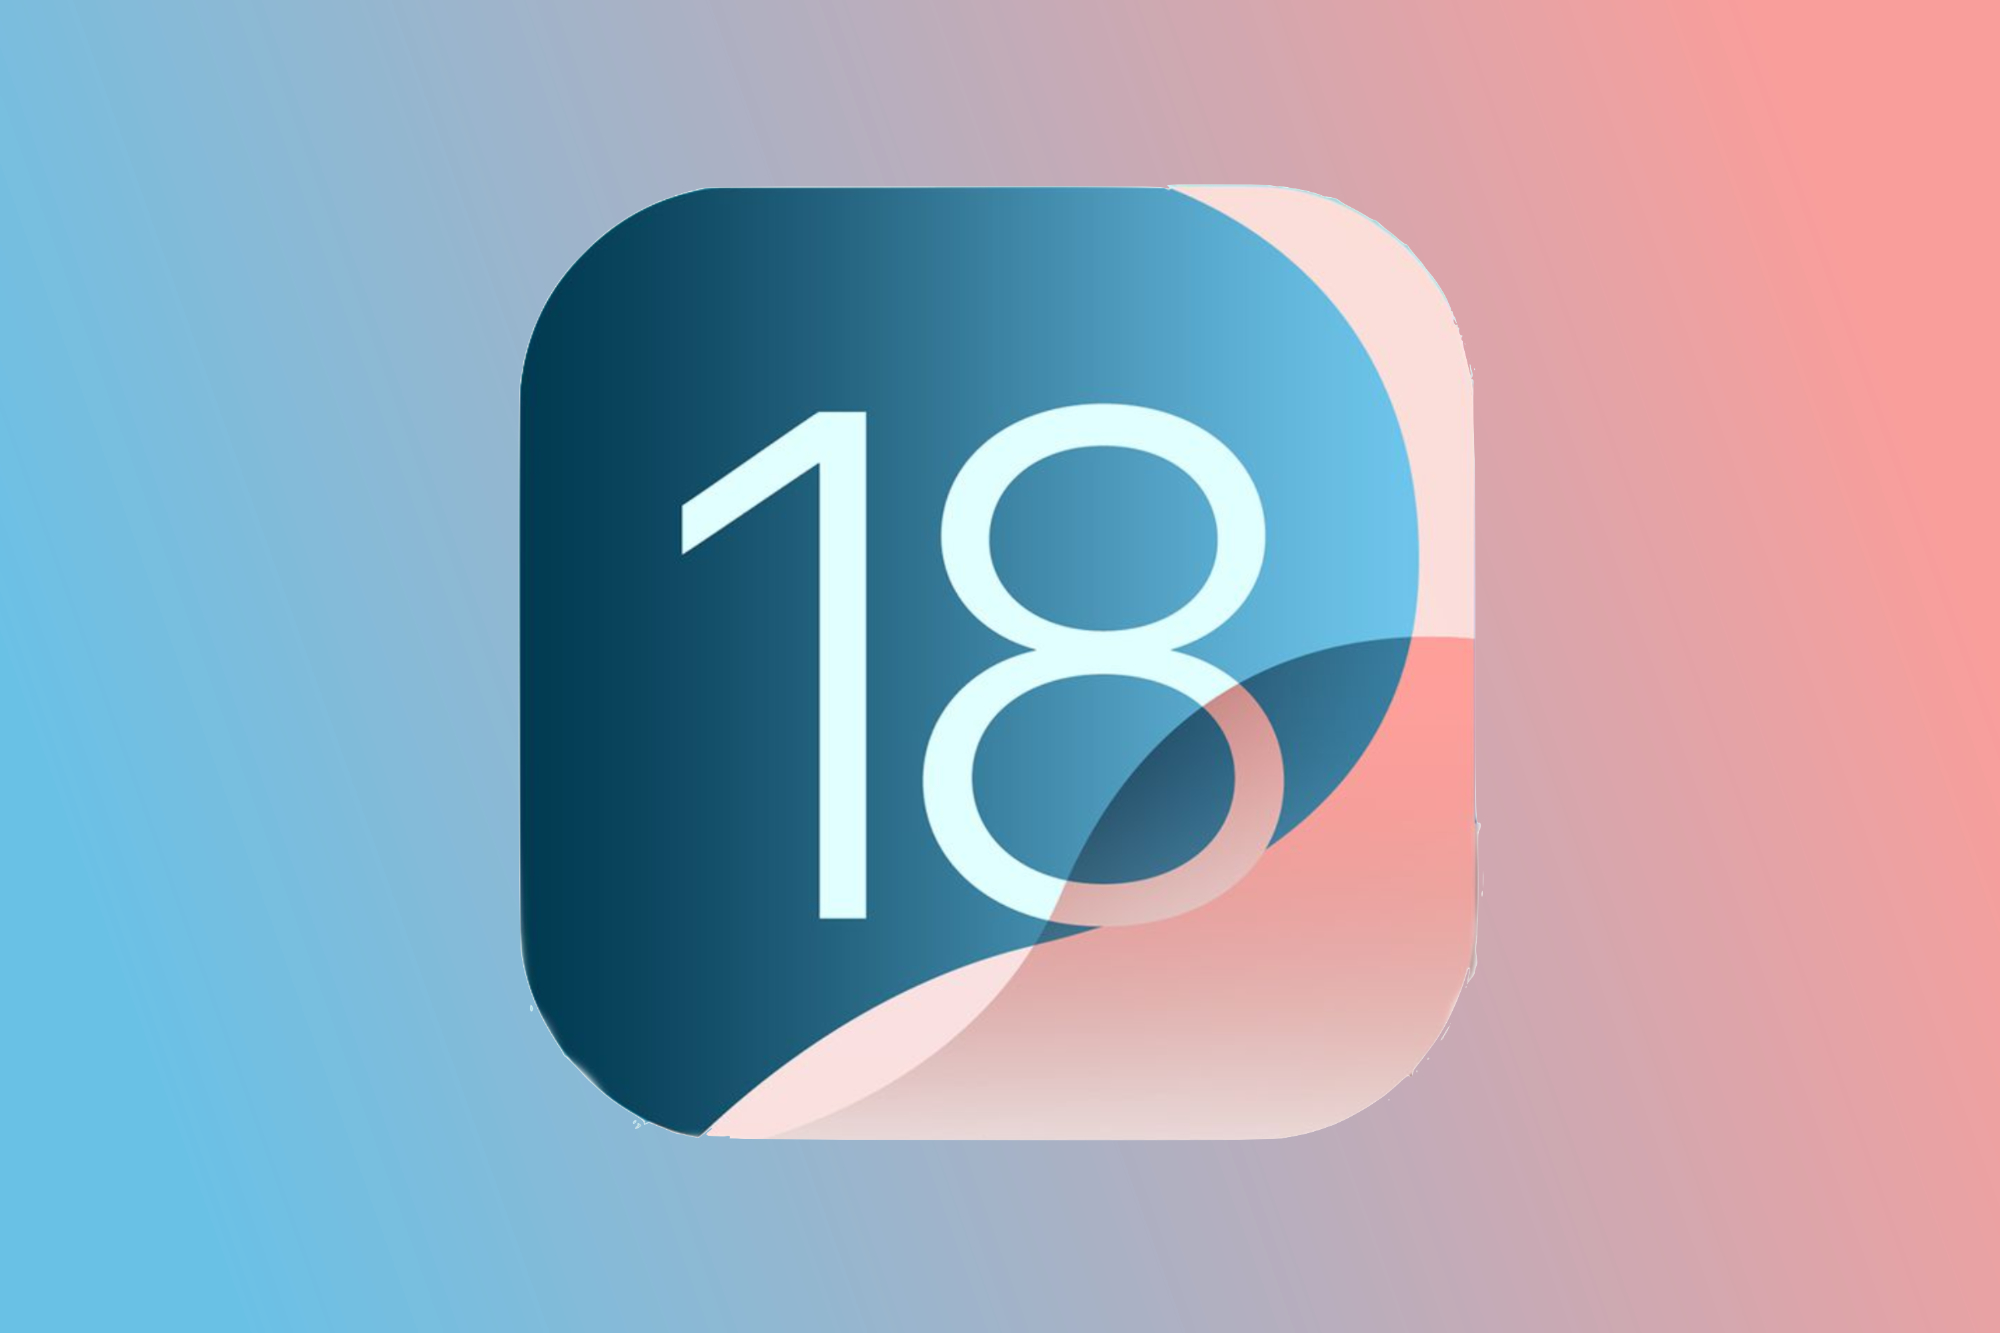 The iOS 18 logo against a blue and pink background.